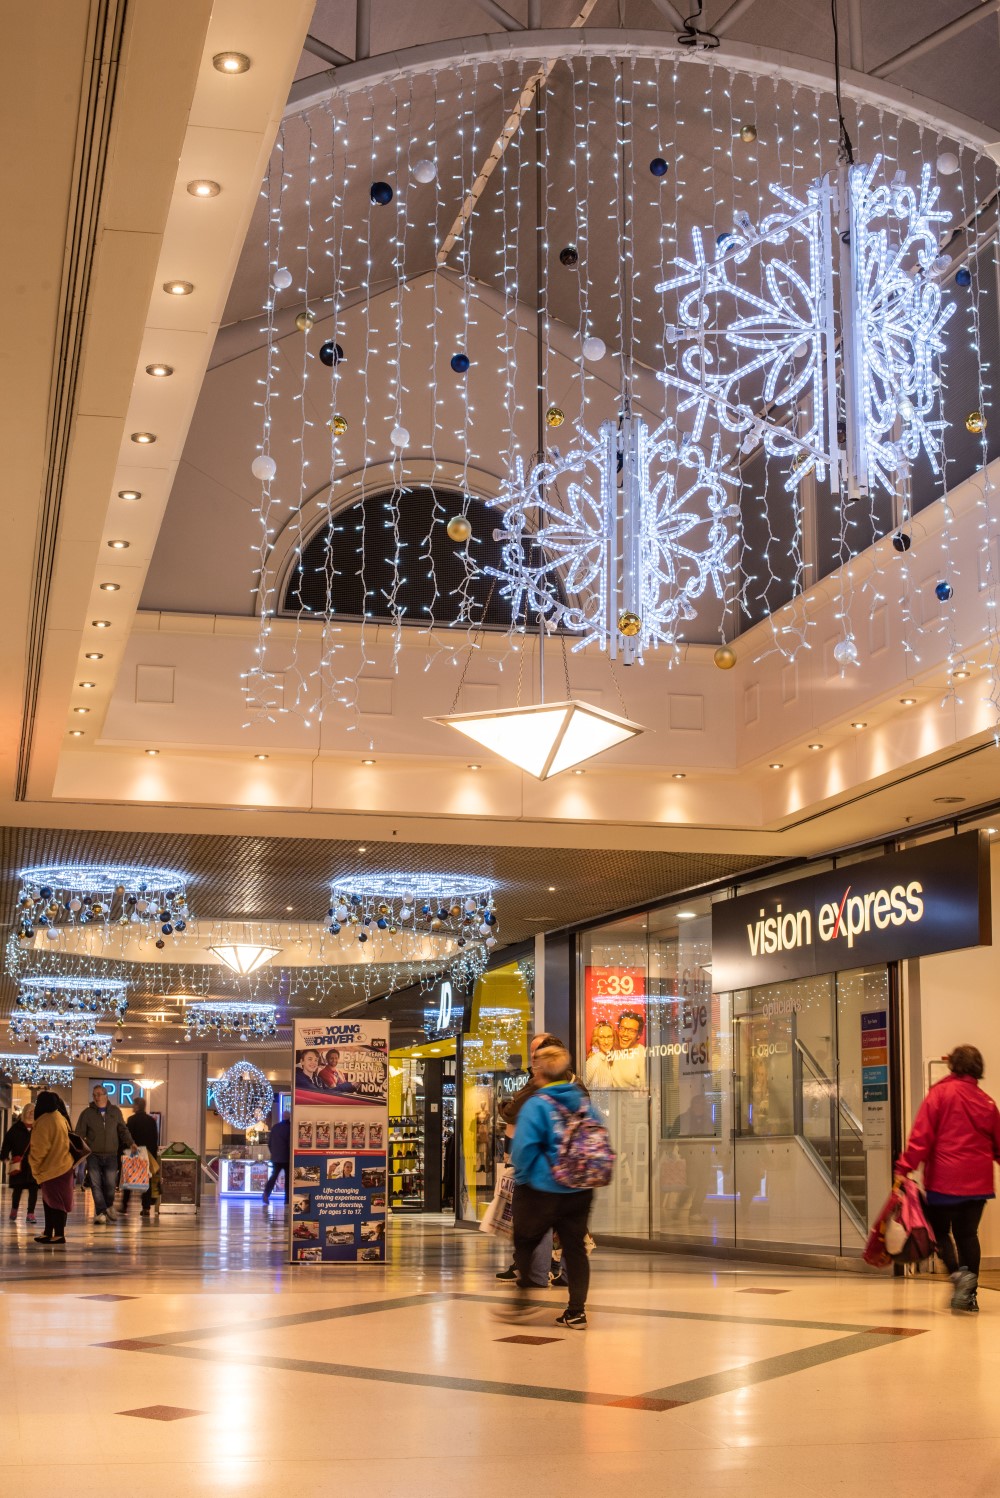 Bright white 2D circular motifs hanging from the shopping centre ceiling with blue, gold and white baubles with bright white icicle lights, curtain lights and aurora balls hanging from the ceiling.